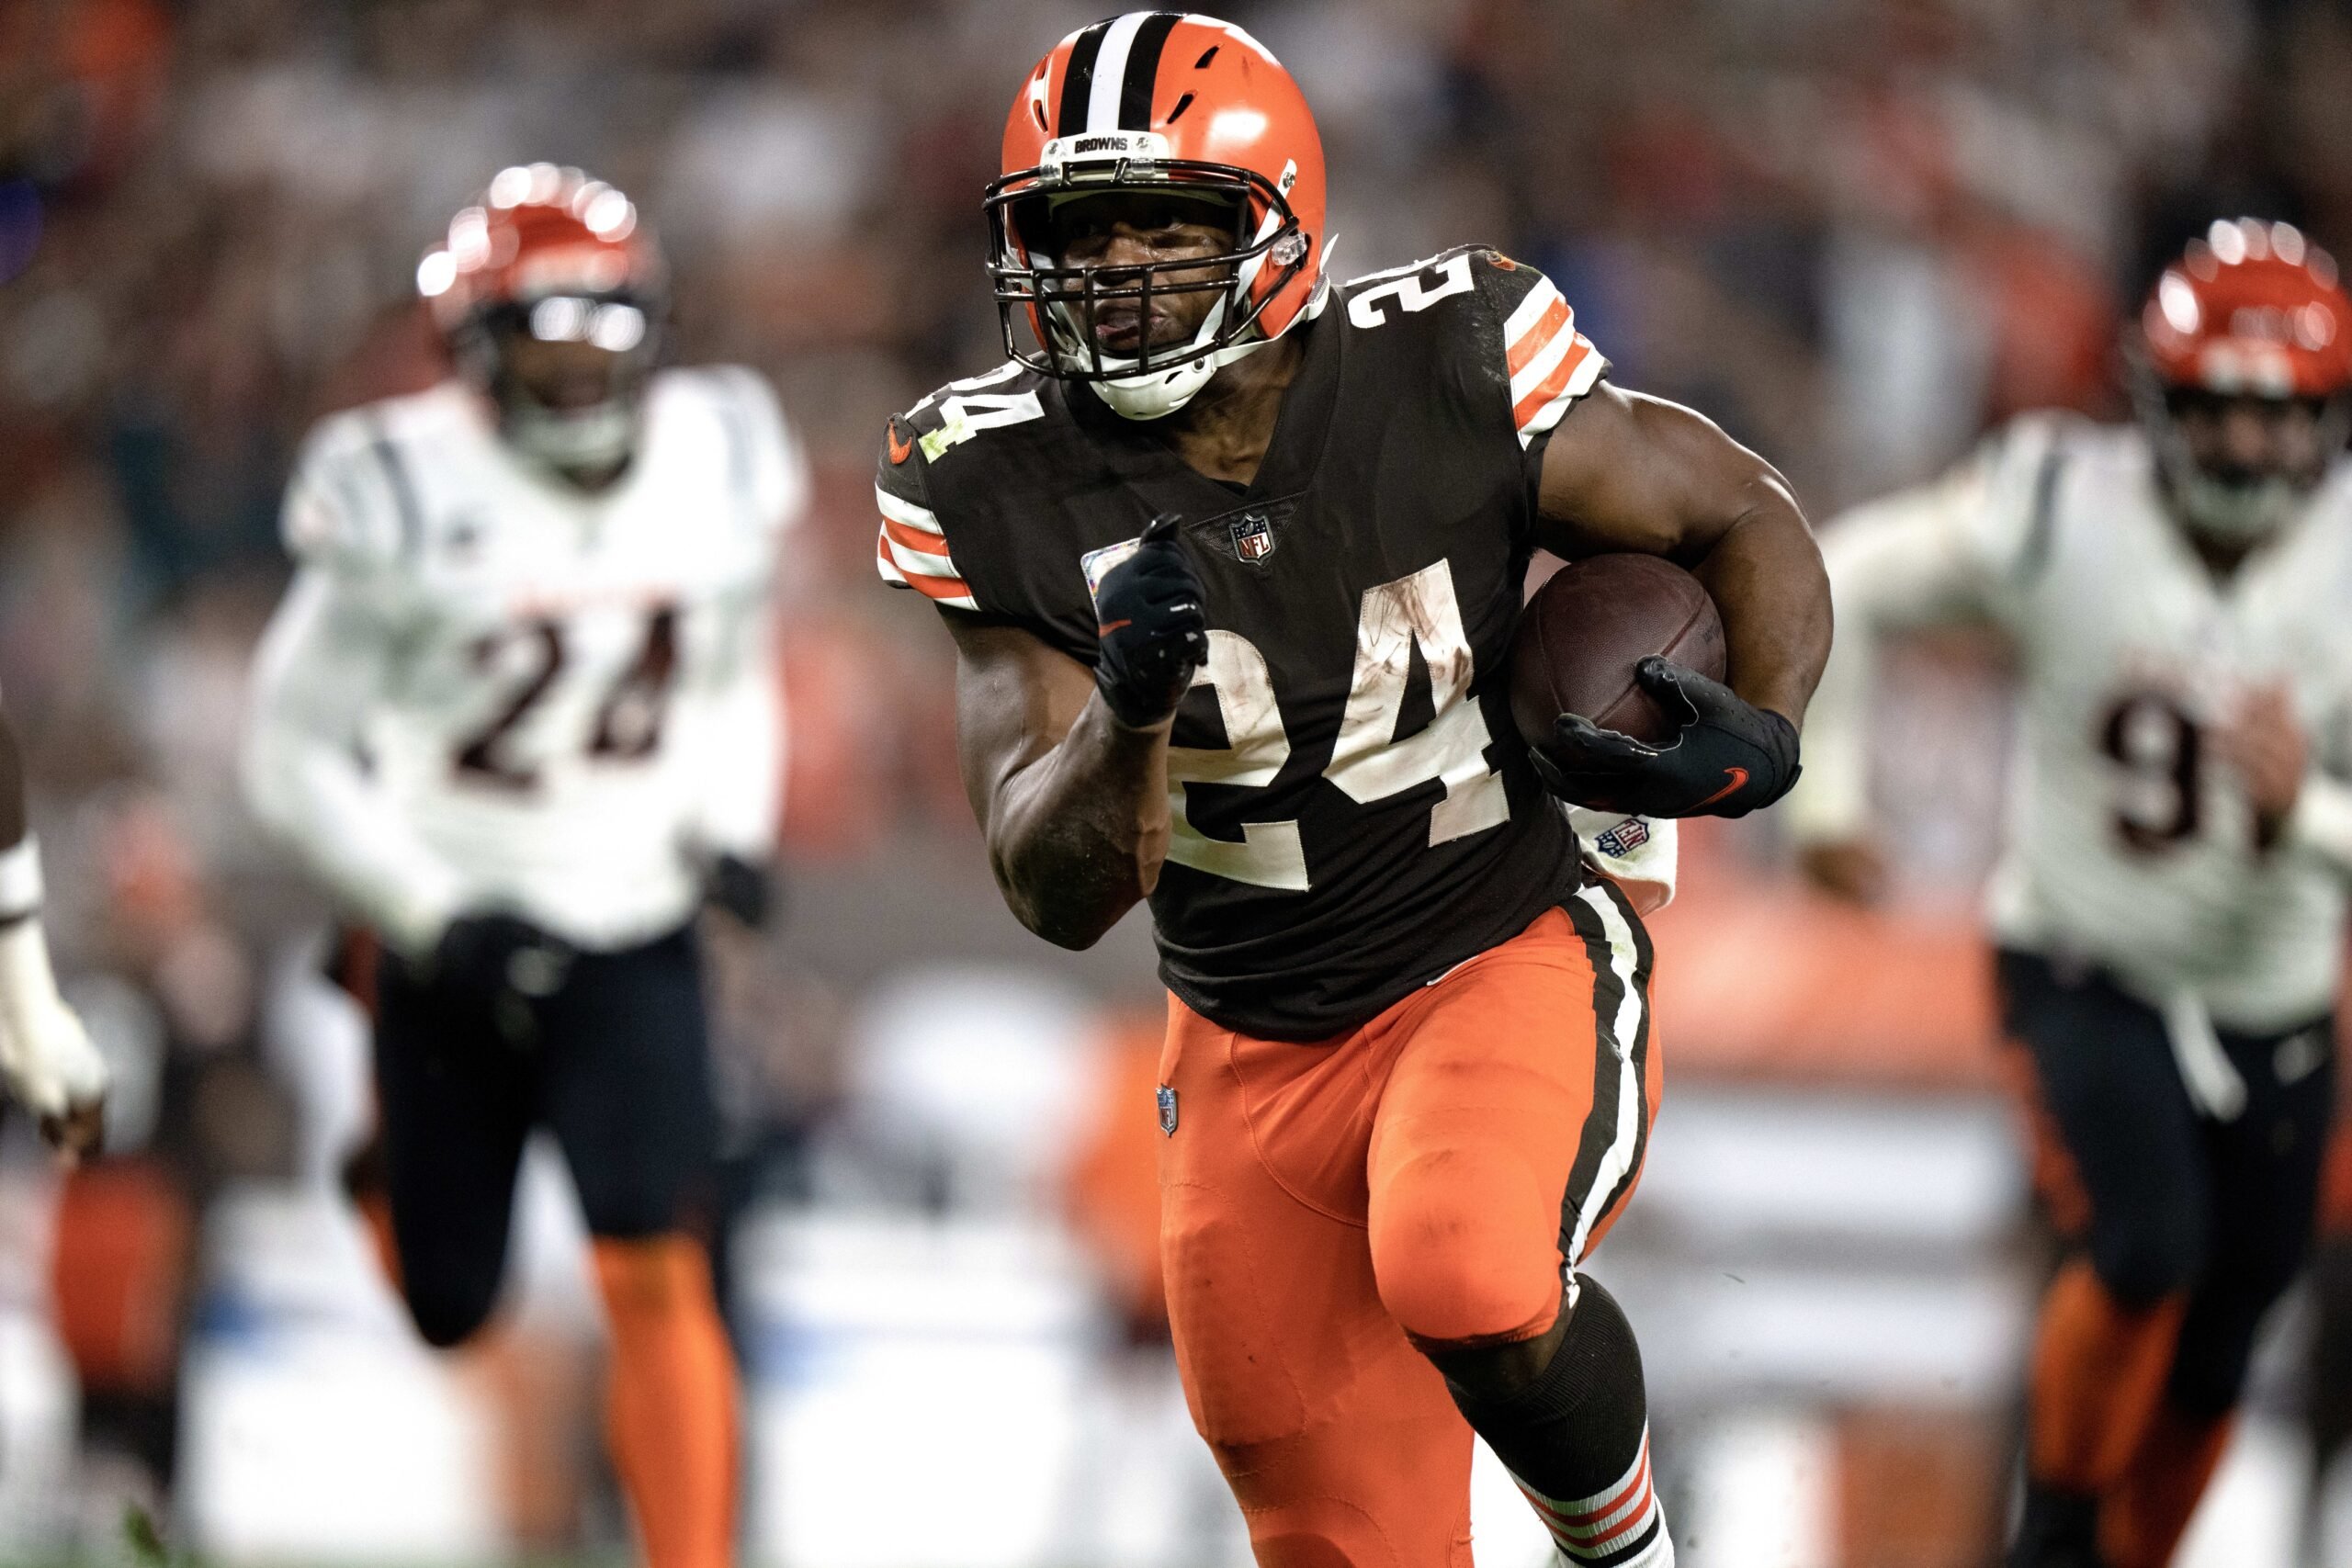 By the Numbers: Nick Chubb clears 100 yards for 3rd time in 2022, but  Falcons go over 200 to down Browns